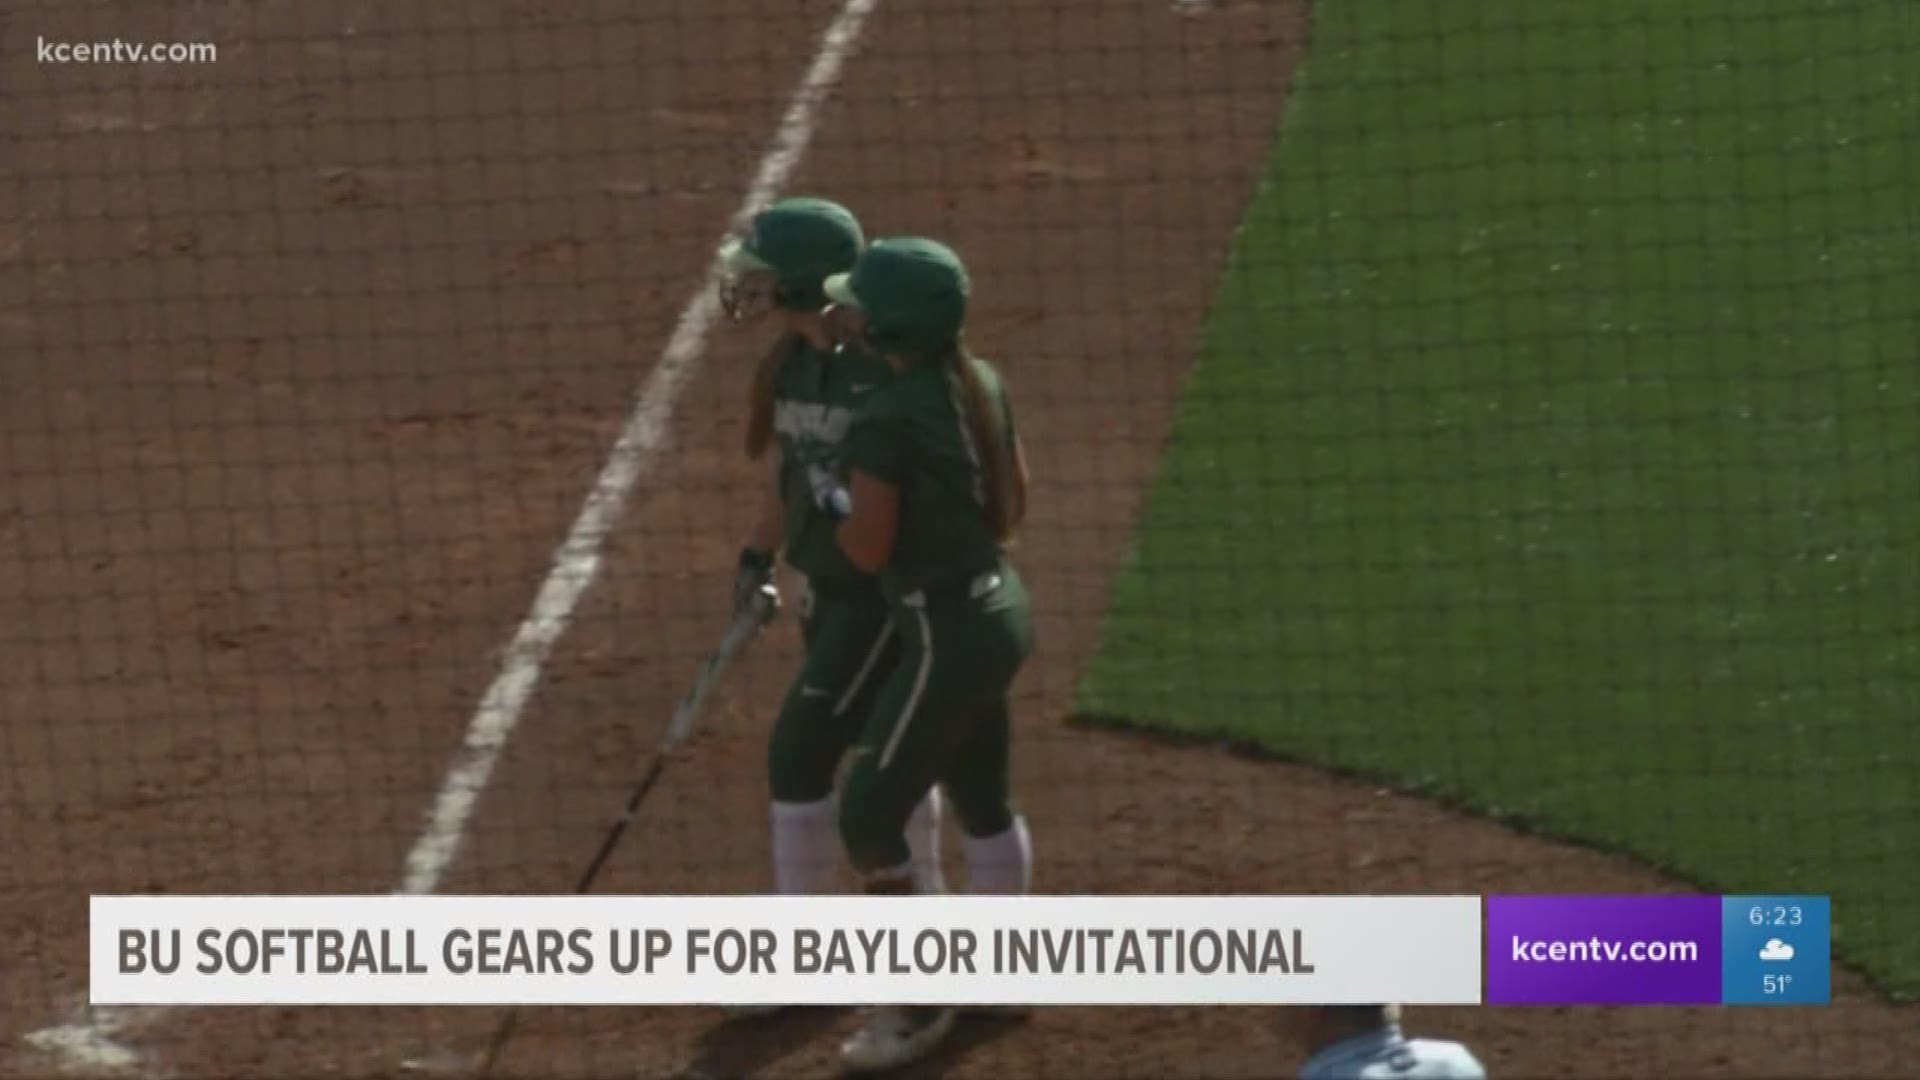 The Lady Bears will take on North Texas Friday at 3 p.m., then turn around and play Louisiana-Lafayette at 5 p.m.